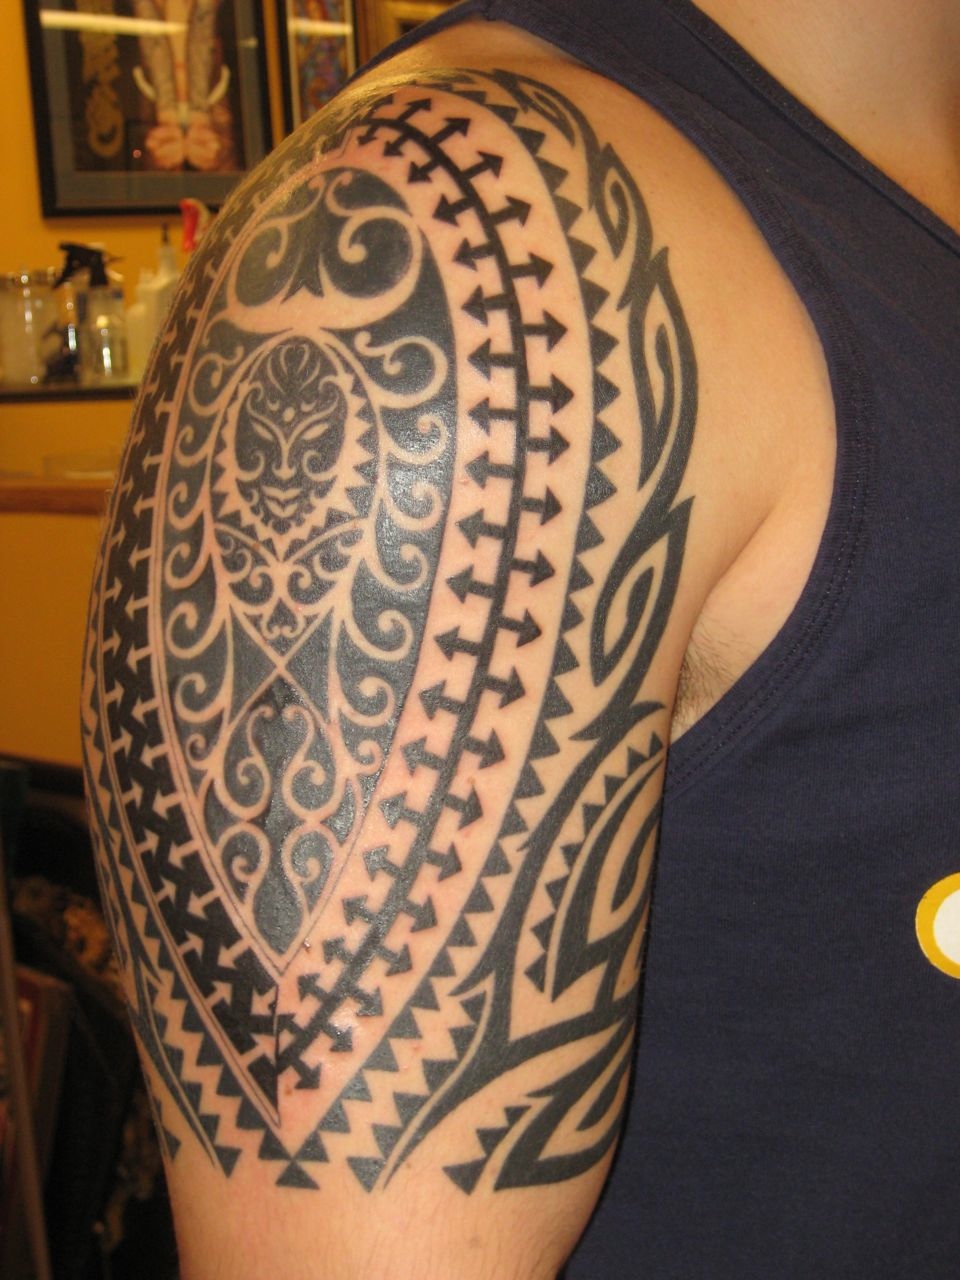 Jim Orie Dragon Tattoo  Polynesian and Samoan inspired tattoo by Jim Orie   Facebook